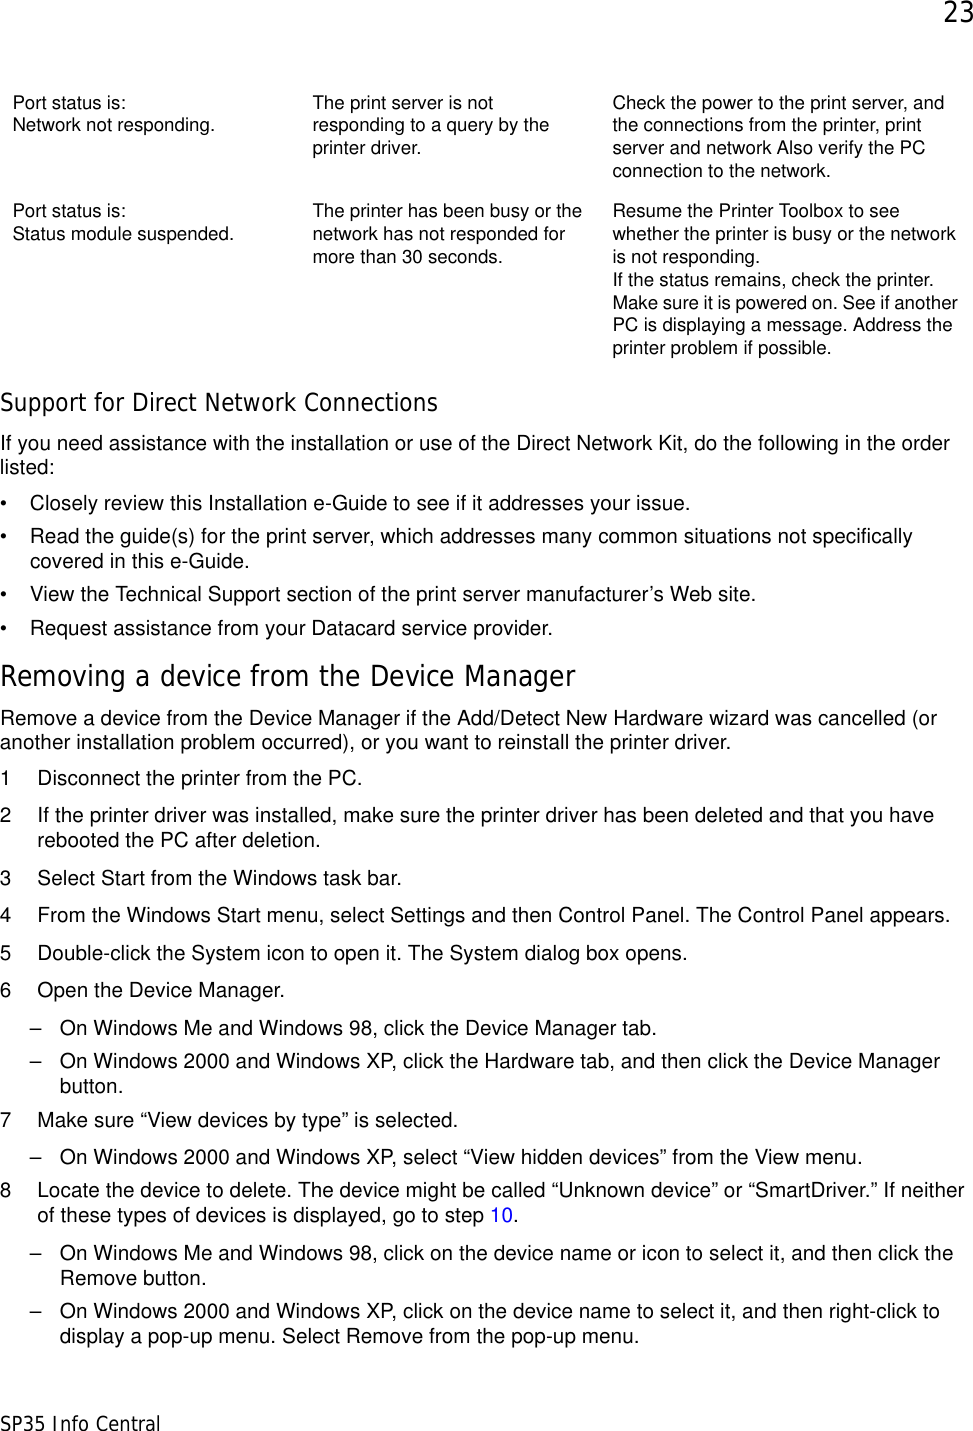 23SP35 Info CentralSupport for Direct Network ConnectionsIf you need assistance with the installation or use of the Direct Network Kit, do the following in the order listed:• Closely review this Installation e-Guide to see if it addresses your issue.• Read the guide(s) for the print server, which addresses many common situations not specifically covered in this e-Guide.• View the Technical Support section of the print server manufacturer’s Web site. • Request assistance from your Datacard service provider.Removing a device from the Device ManagerRemove a device from the Device Manager if the Add/Detect New Hardware wizard was cancelled (or another installation problem occurred), or you want to reinstall the printer driver.1 Disconnect the printer from the PC. 2 If the printer driver was installed, make sure the printer driver has been deleted and that you have rebooted the PC after deletion. 3 Select Start from the Windows task bar.4 From the Windows Start menu, select Settings and then Control Panel. The Control Panel appears.5 Double-click the System icon to open it. The System dialog box opens.6 Open the Device Manager.– On Windows Me and Windows 98, click the Device Manager tab. – On Windows 2000 and Windows XP, click the Hardware tab, and then click the Device Manager button.7 Make sure “View devices by type” is selected.– On Windows 2000 and Windows XP, select “View hidden devices” from the View menu.8 Locate the device to delete. The device might be called “Unknown device” or “SmartDriver.” If neither of these types of devices is displayed, go to step 10.– On Windows Me and Windows 98, click on the device name or icon to select it, and then click the Remove button.– On Windows 2000 and Windows XP, click on the device name to select it, and then right-click to display a pop-up menu. Select Remove from the pop-up menu. Port status is: Network not responding.  The print server is not responding to a query by the printer driver.Check the power to the print server, and the connections from the printer, print server and network Also verify the PC connection to the network.Port status is: Status module suspended. The printer has been busy or the network has not responded for more than 30 seconds. Resume the Printer Toolbox to see whether the printer is busy or the network is not responding.If the status remains, check the printer. Make sure it is powered on. See if another PC is displaying a message. Address the printer problem if possible.